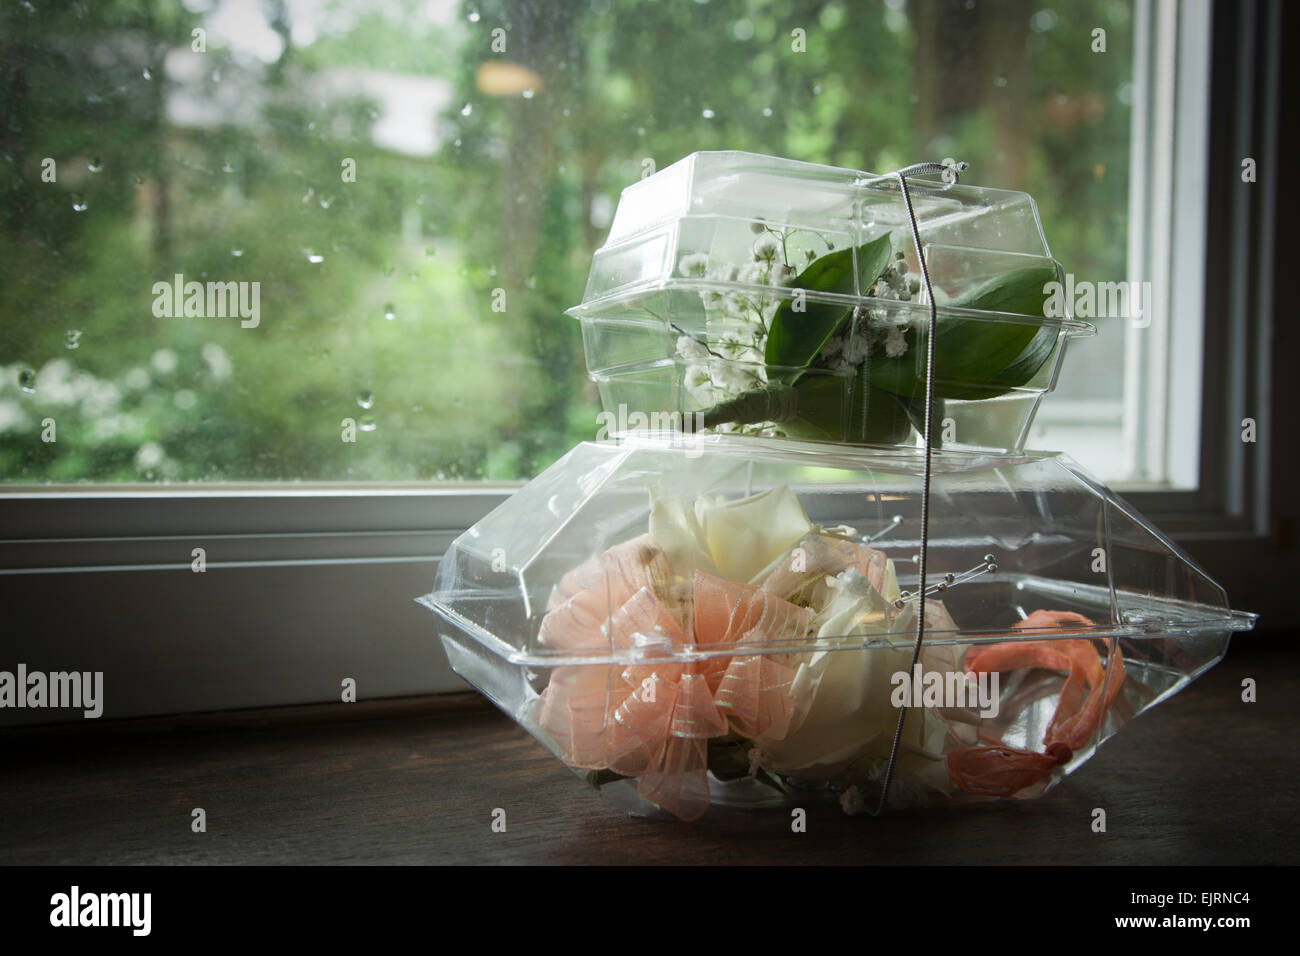 A prom corsage and boutonnière rest on a windowsill; you can see the raindrops on the window behind them Stock Photo